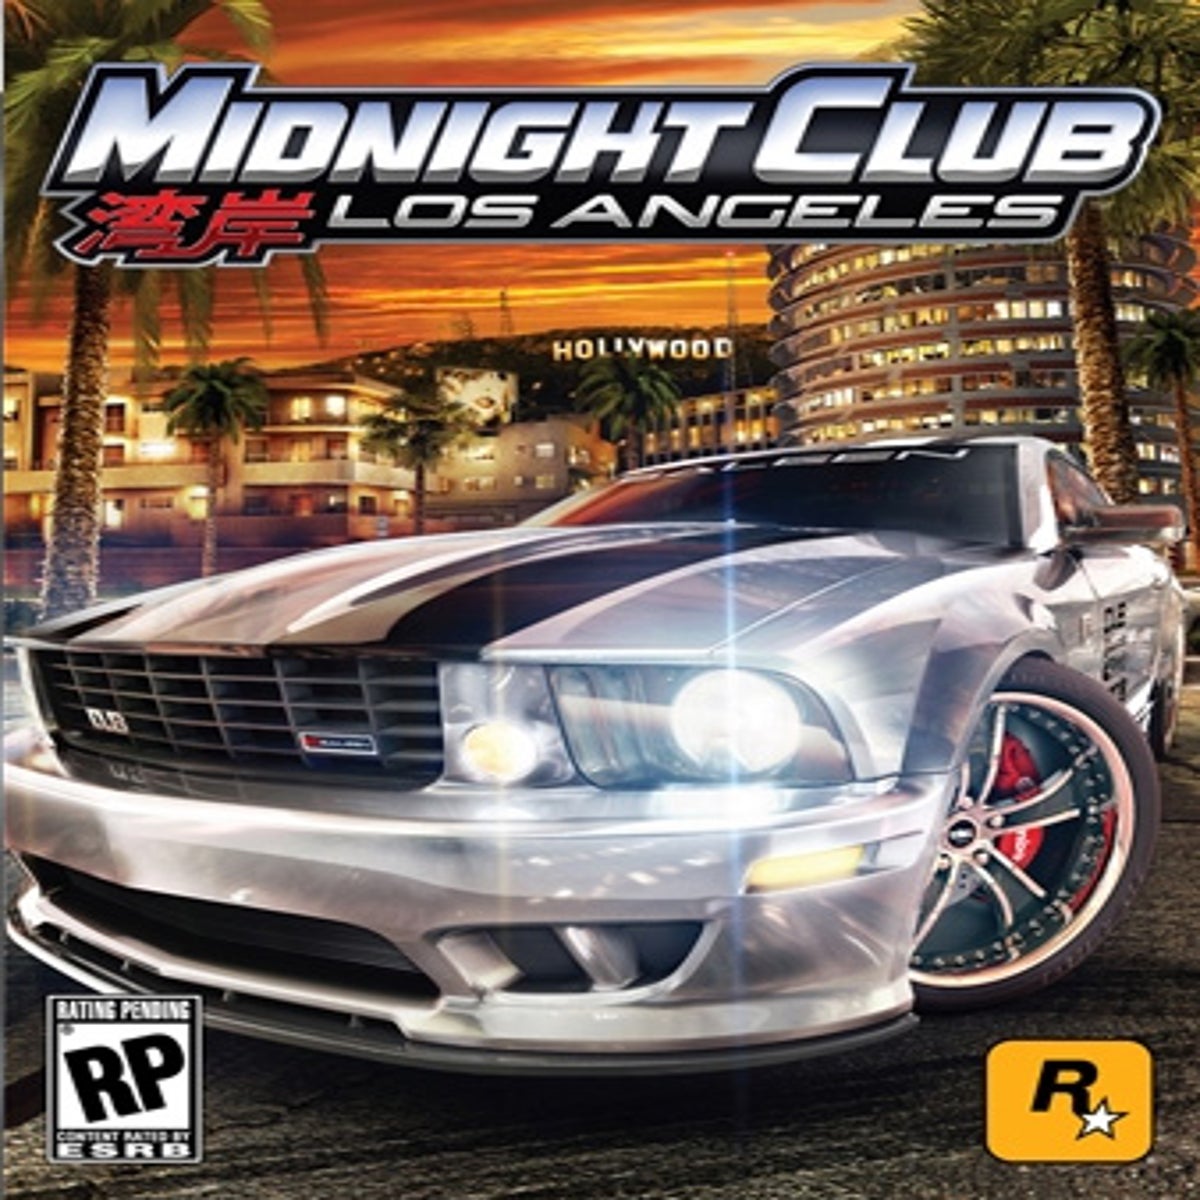 Game review: Midnight Club: Los Angeles | The Independent | The Independent